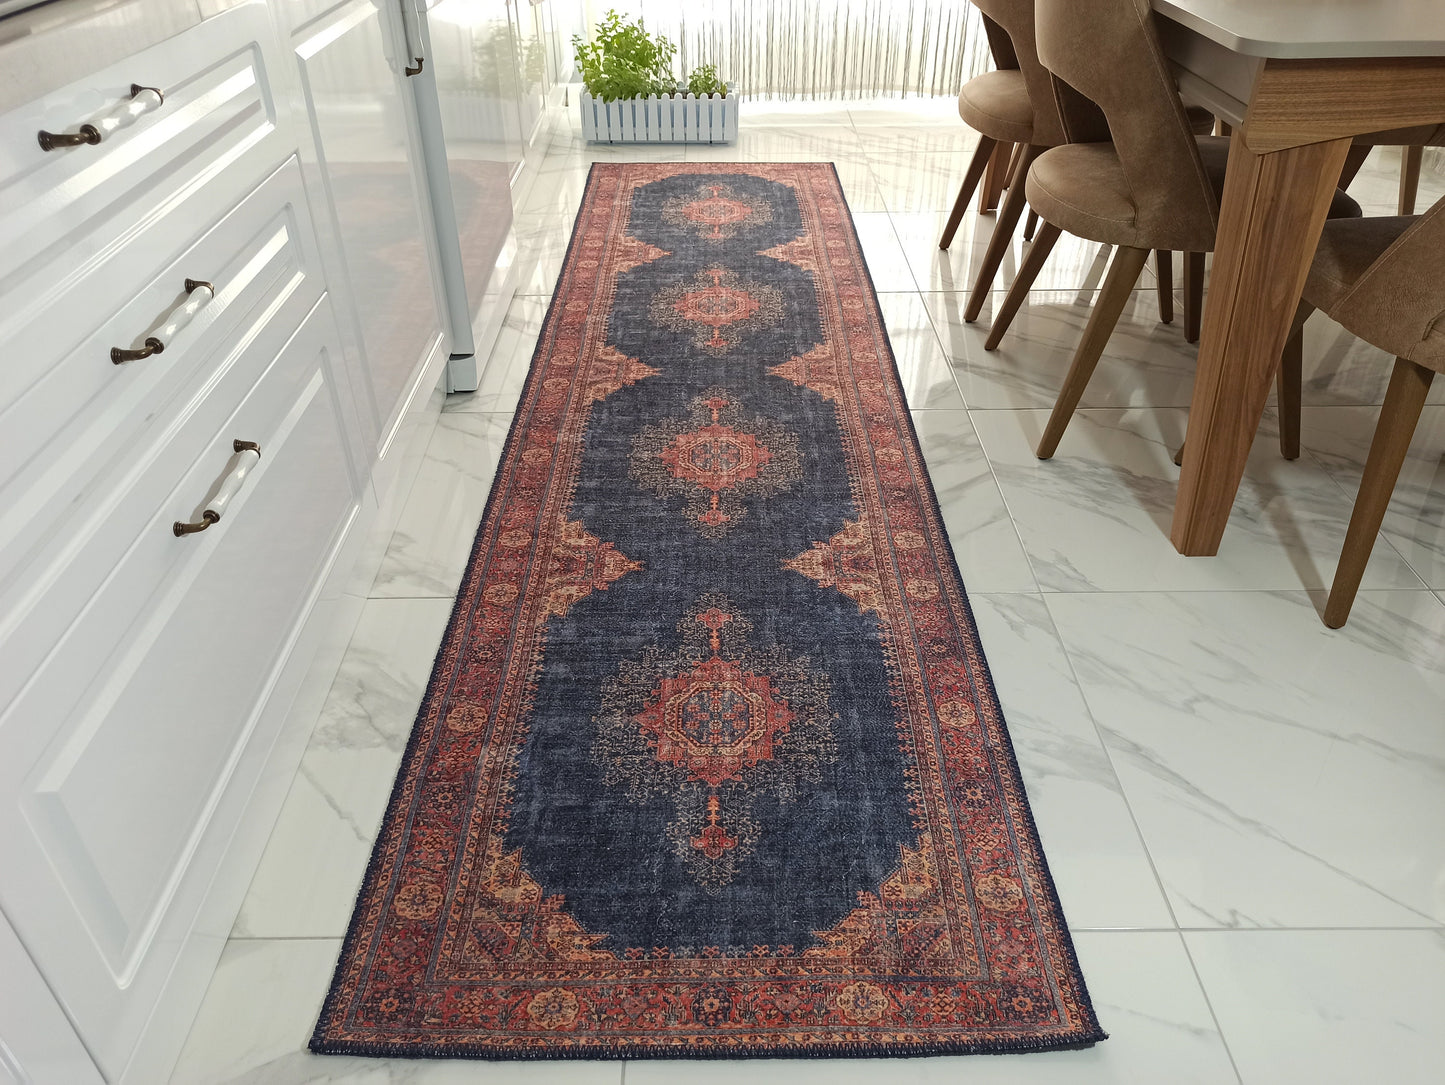 NARGAN Runner | Persian Pattern Oriental Rug, Antique Hand-knotted look, Home decor, Traditional, Art deco Runners, Navy blue, Red, Rugs